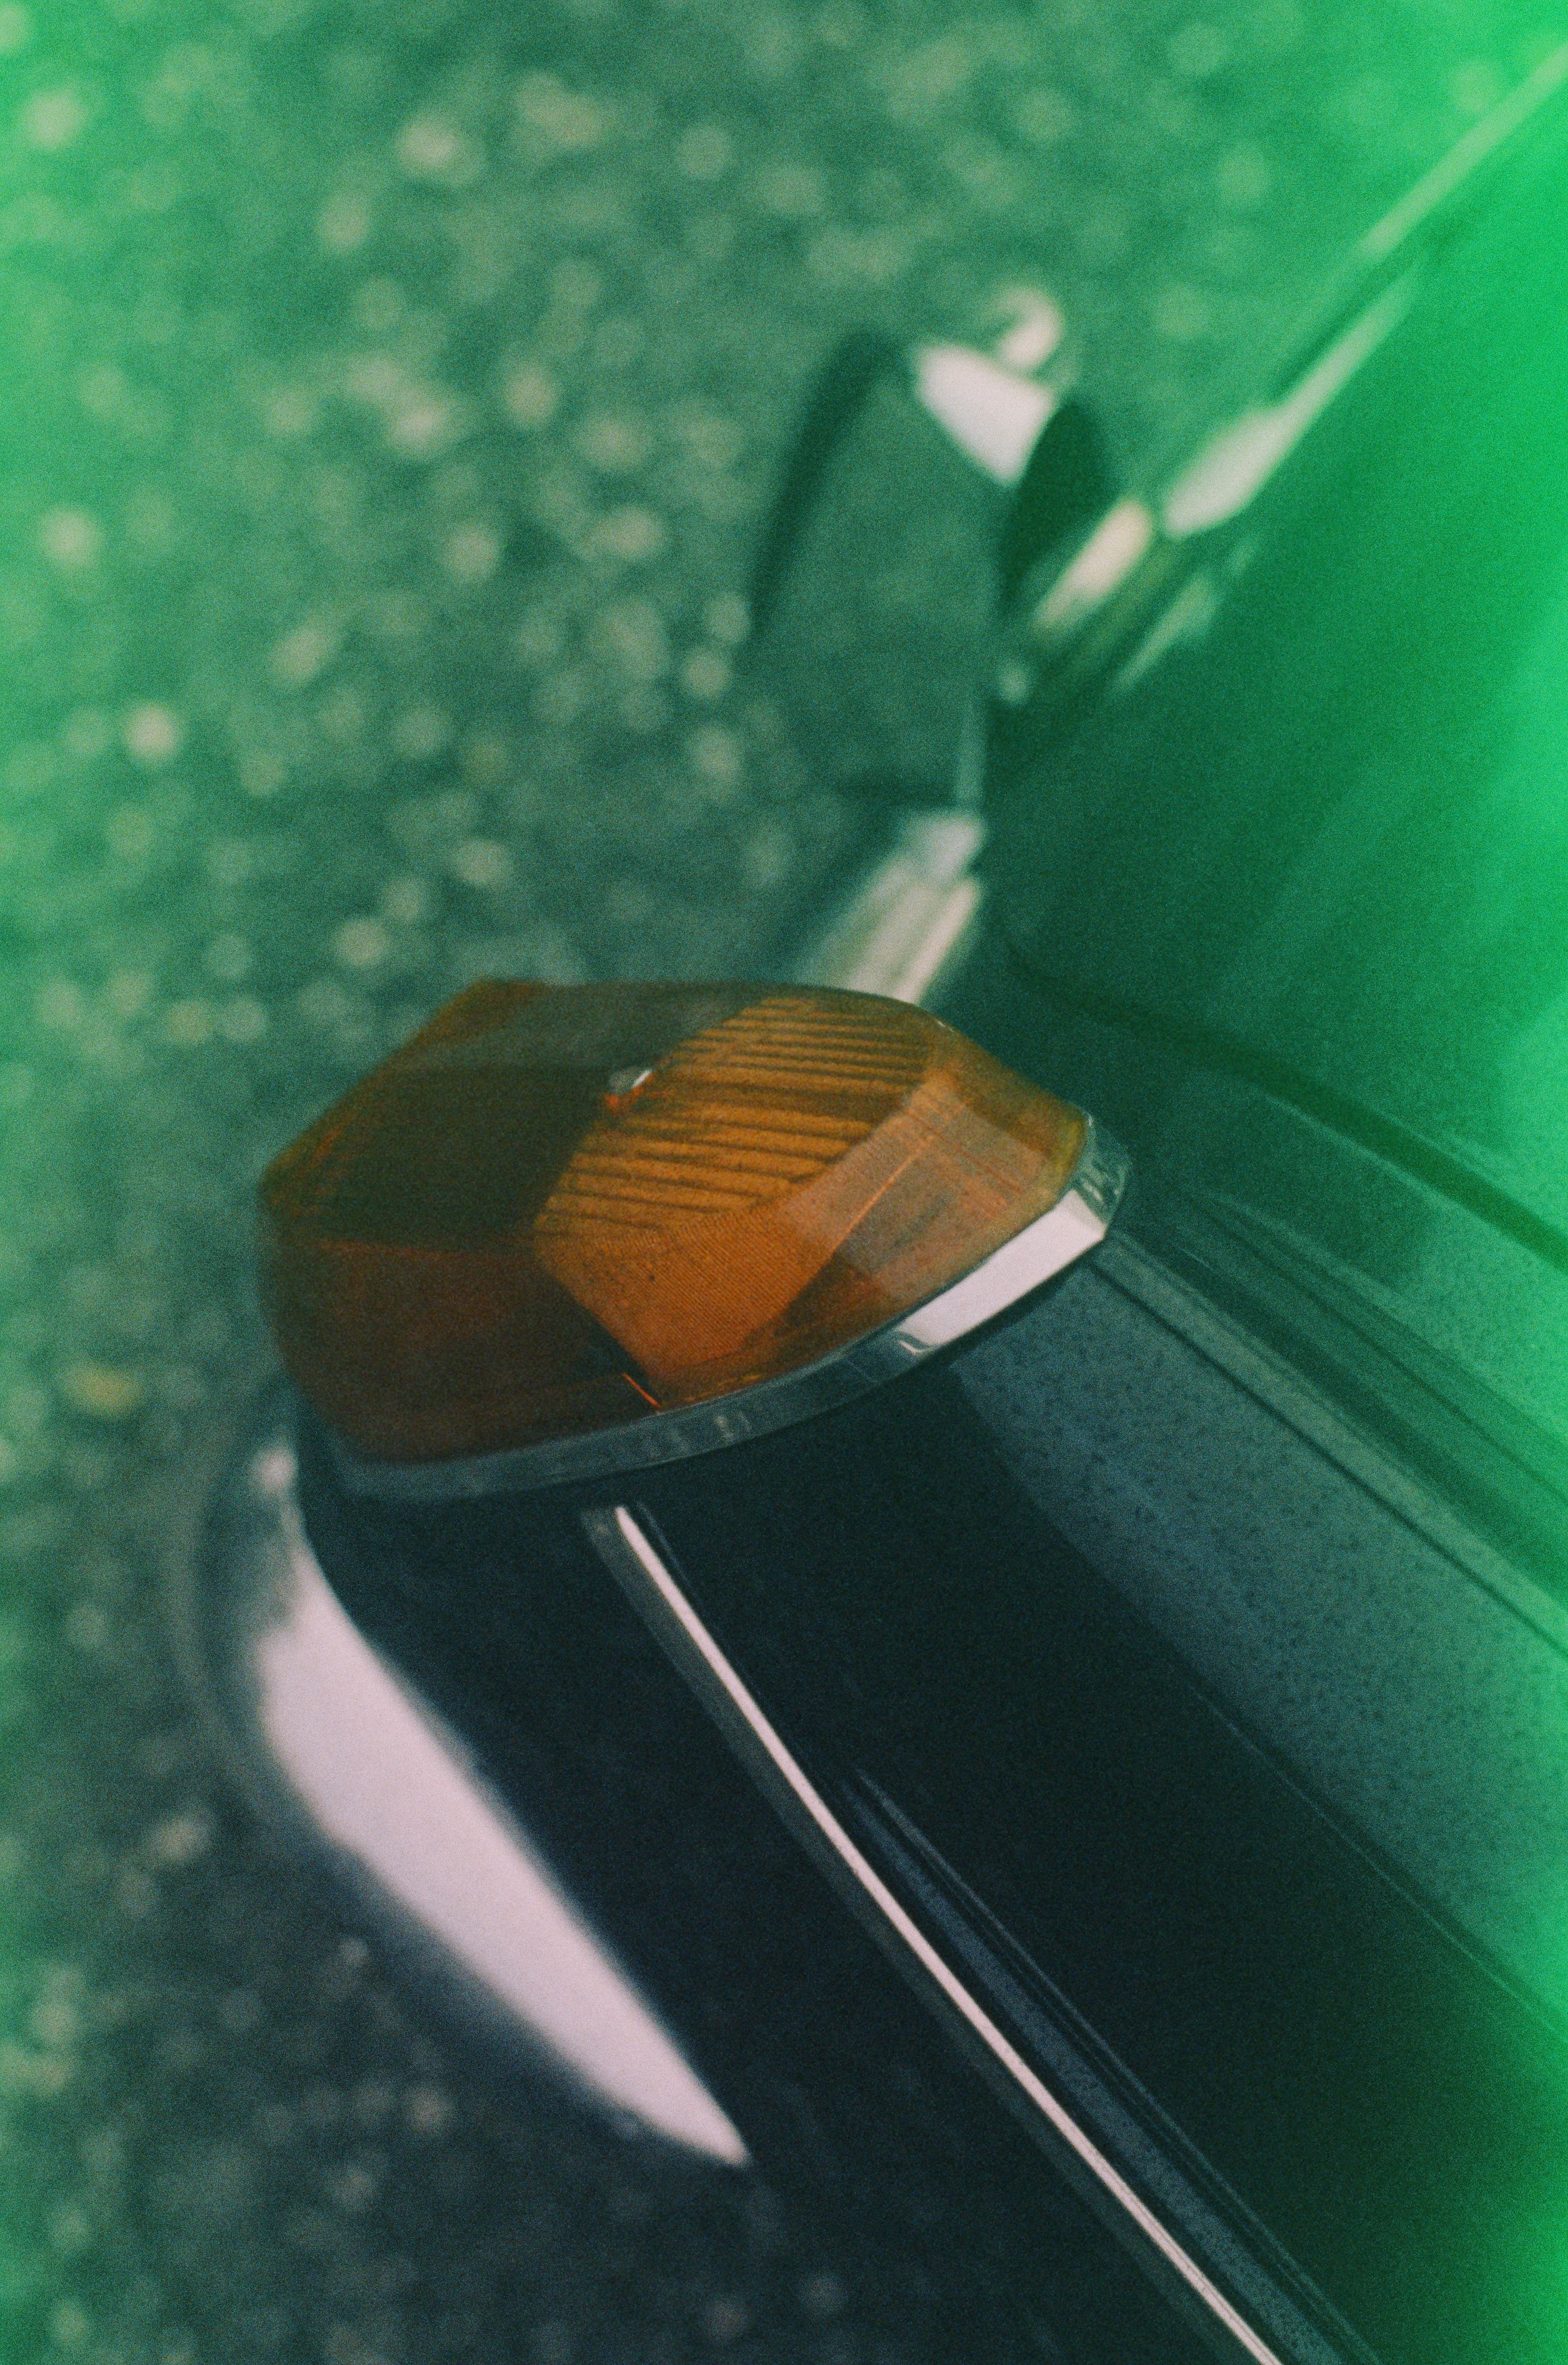 Vintage classic british oldtimer – MG chrome rear lights. Incorrect exposure due to the expired date and probably incorrect storage. Made with Leica R7 (1994) and Summilux-R 1.4 50mm (1983). Hi-Res analog scan by: www.totallyinfocus.com – Fujichrome Provia 400 (expired 2004)